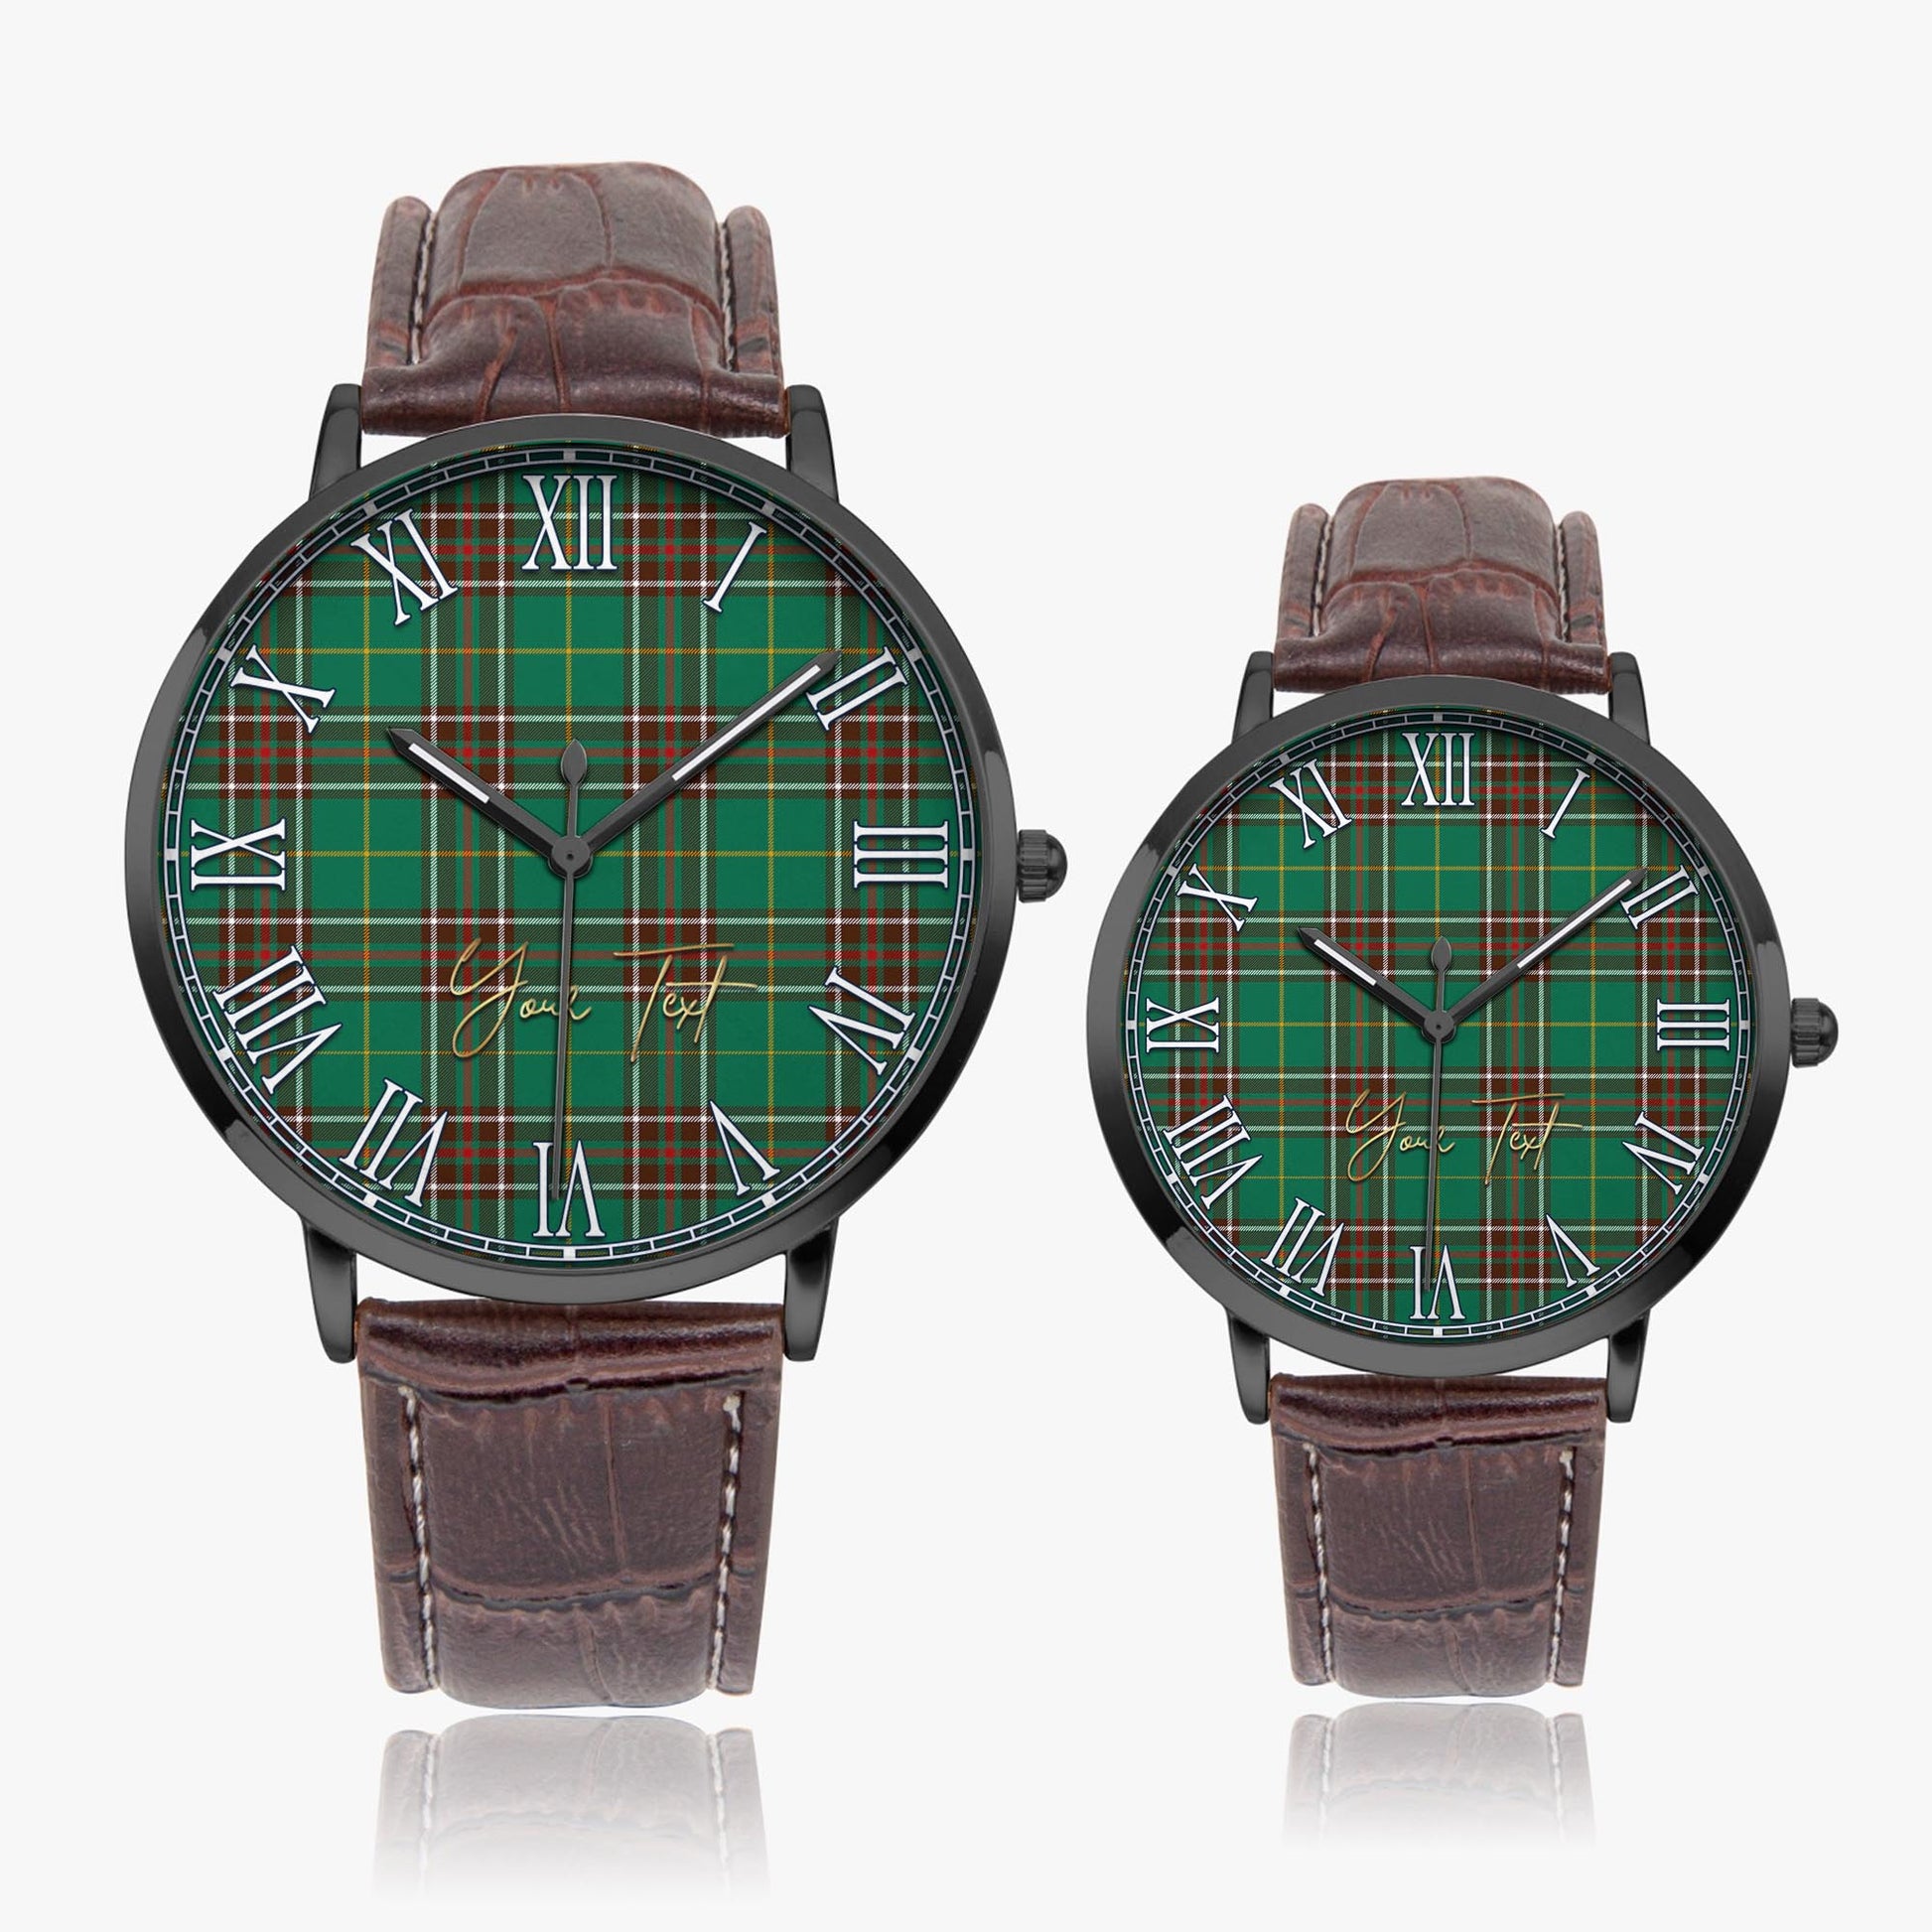 Newfoundland And Labrador Province Canada Tartan Personalized Your Text Leather Trap Quartz Watch Ultra Thin Black Case With Brown Leather Strap - Tartanvibesclothing